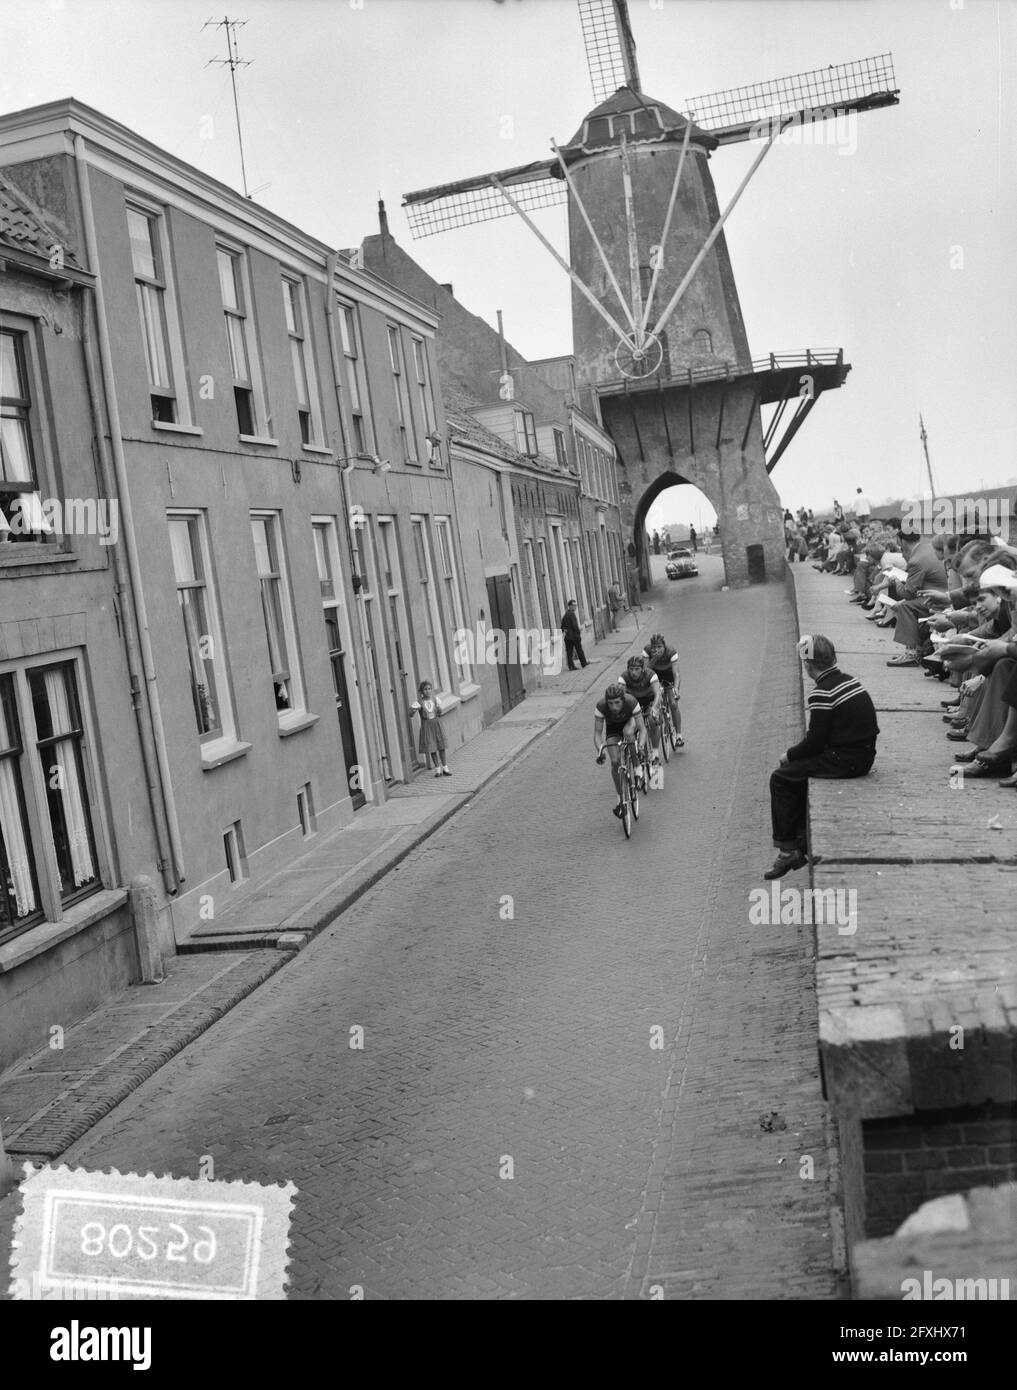 Cycling club championships Netherlands on the road, September 26, 1956, WIELRENNEN, The Netherlands, 20th century press agency photo, news to remember, documentary, historic photography 1945-1990, visual stories, human history of the Twentieth Century, capturing moments in time Stock Photo